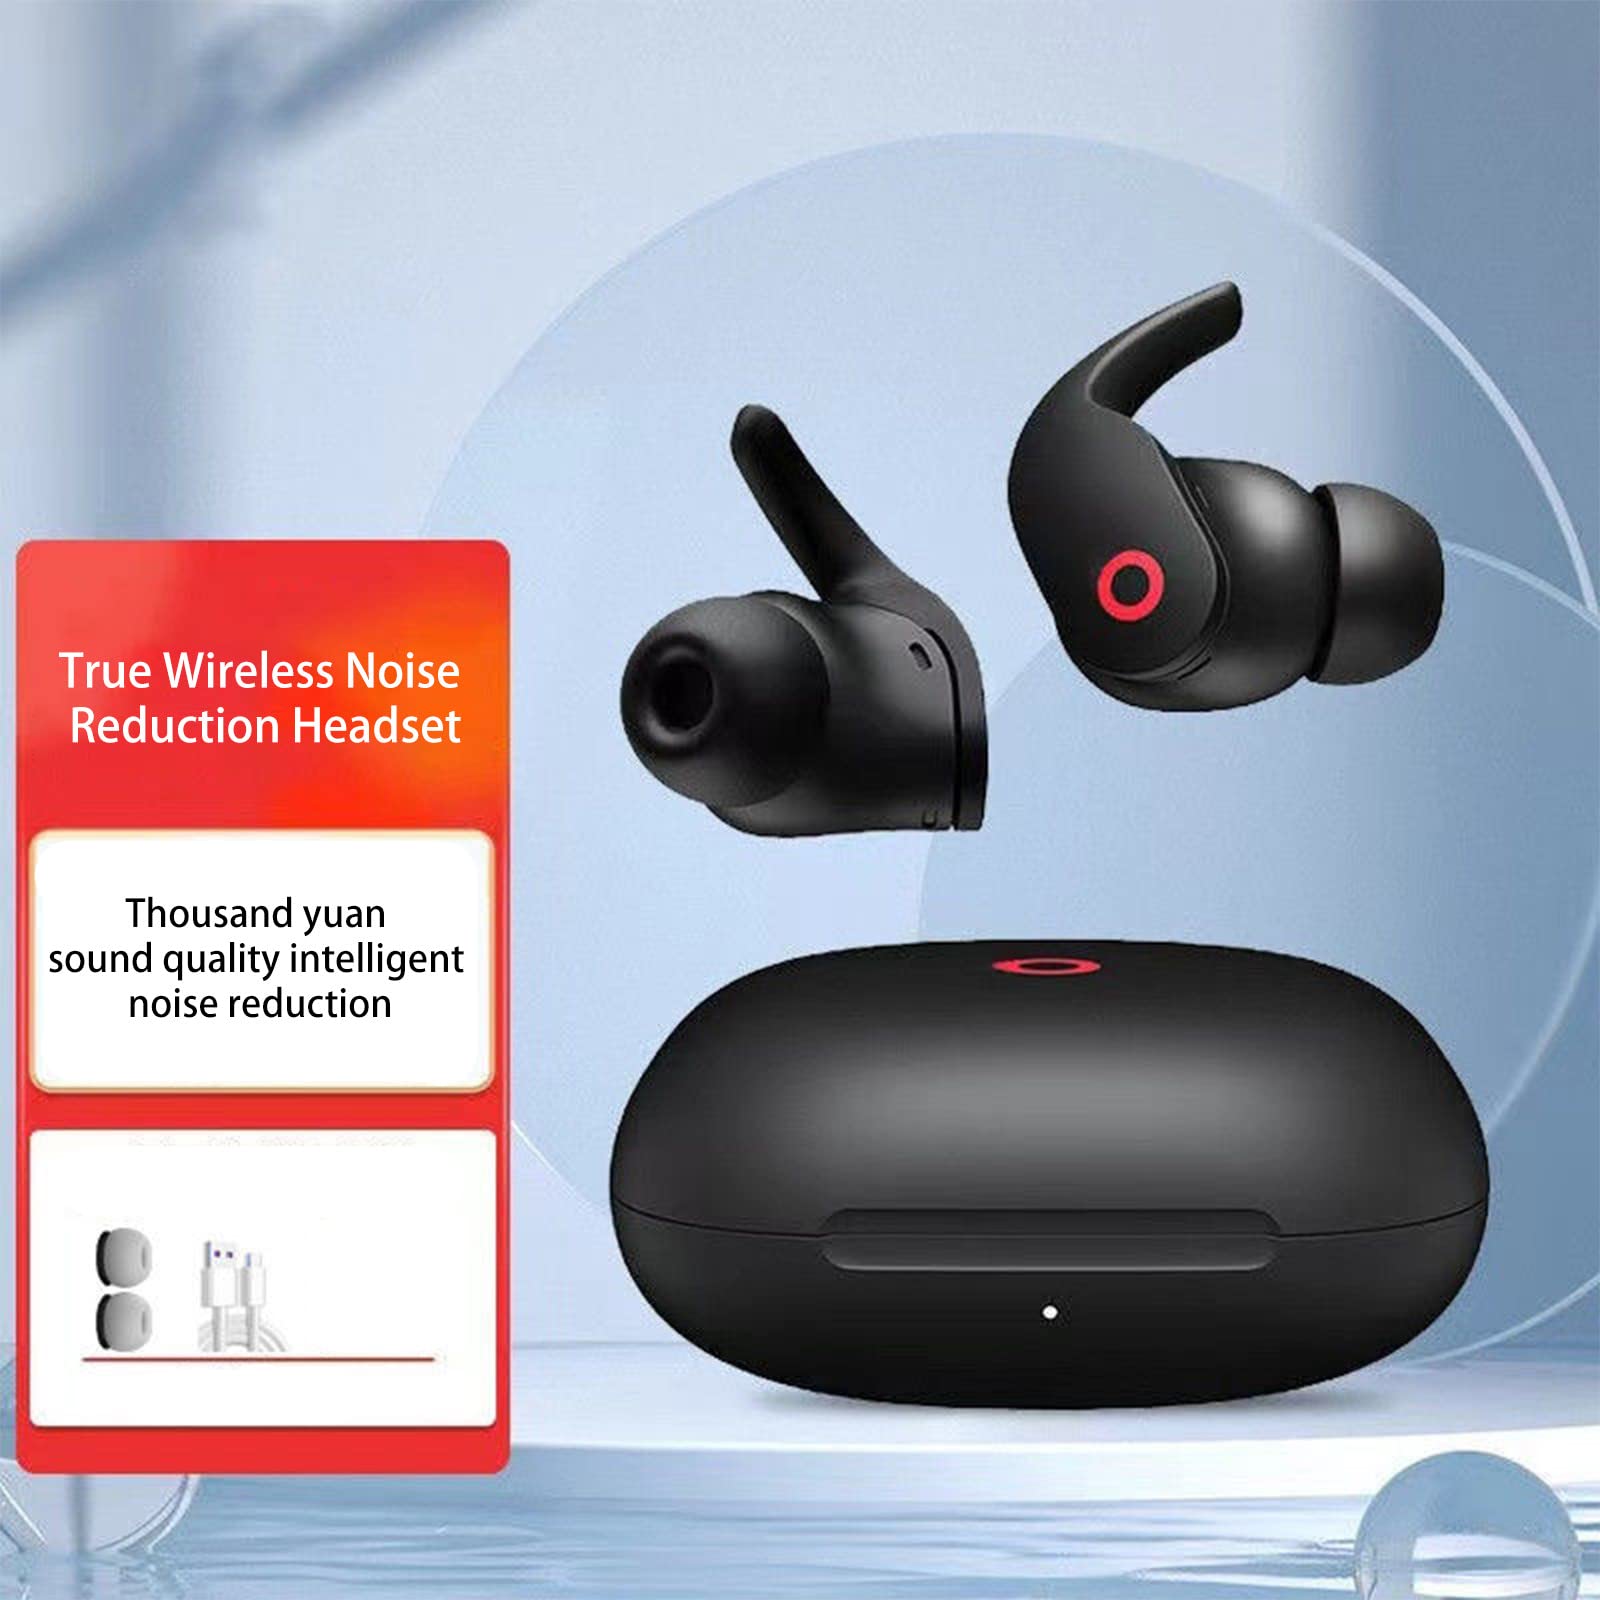 Viadha True Wireless Bluetooth 5.2 Headphones Noise Cancelling Earbuds, in-Ear HiFi Stero Earphones Built-in Mic for iOS & Android, IPX 7 Waterproof, Suitable for Daily Sport Workout Use